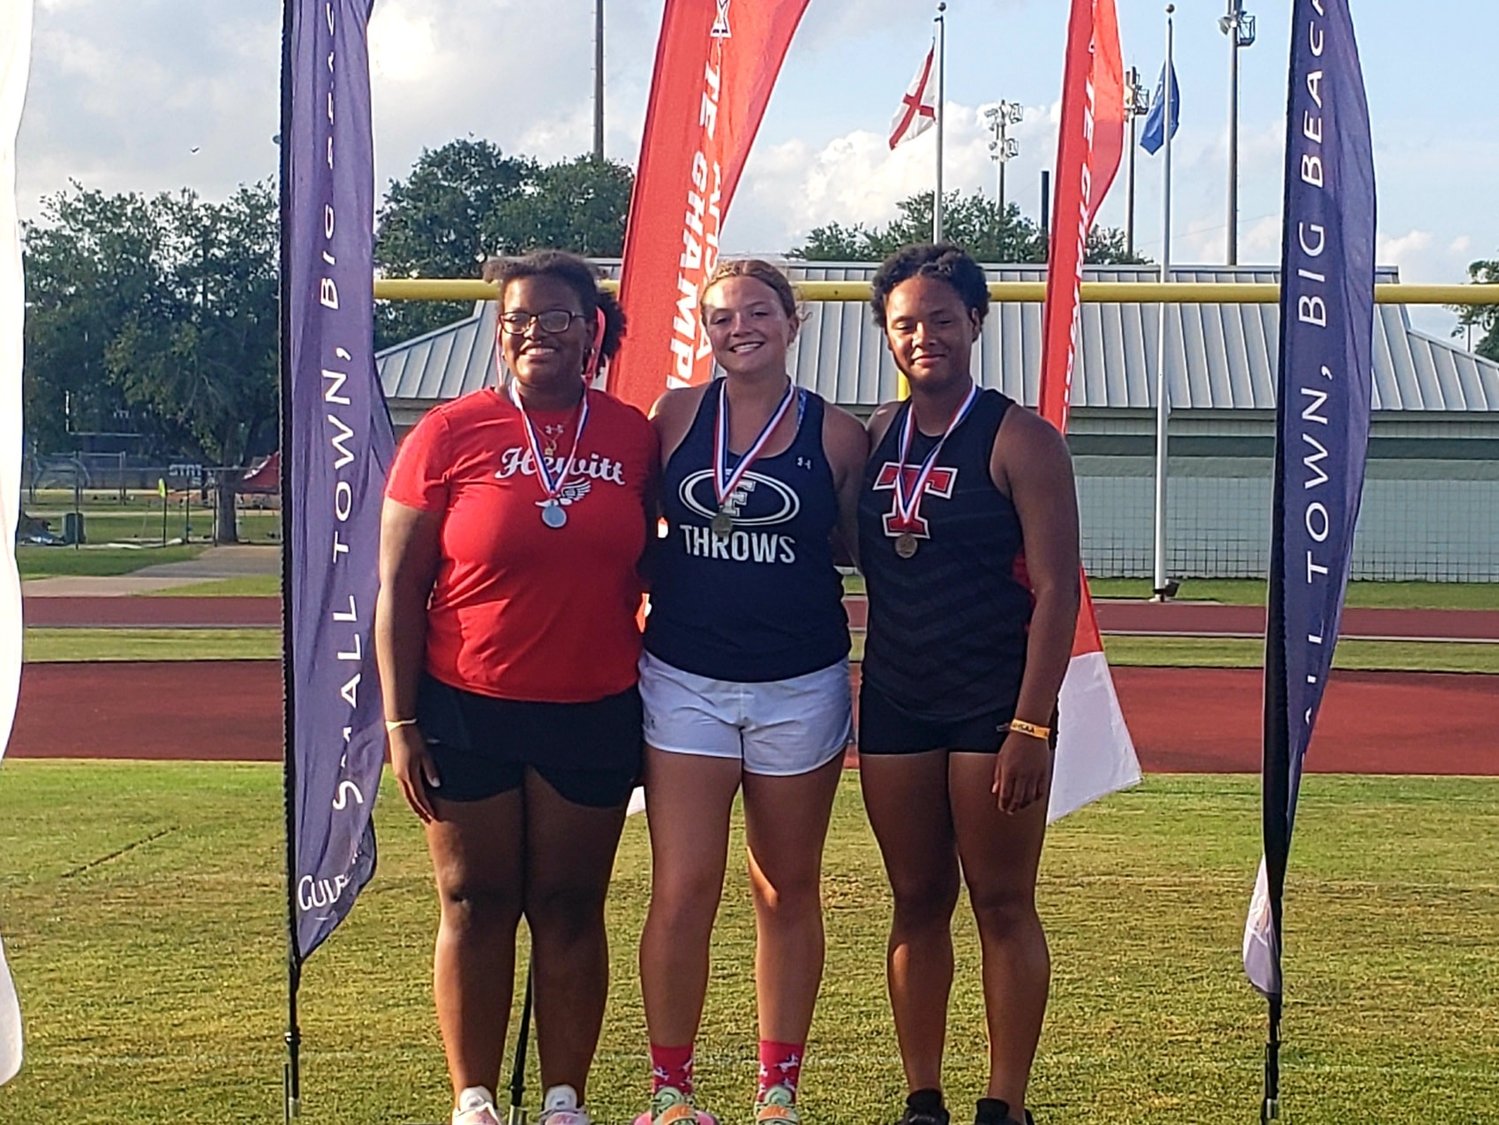 Lady Lions junior Emily Wolf claimed the Class 7A discus crown in Gulf Shores last weekend at the state championships. She was joined on the podium by Hewitt-Trussville’s Madisyn Hawkins and Thompson’s Akasha Dudley.